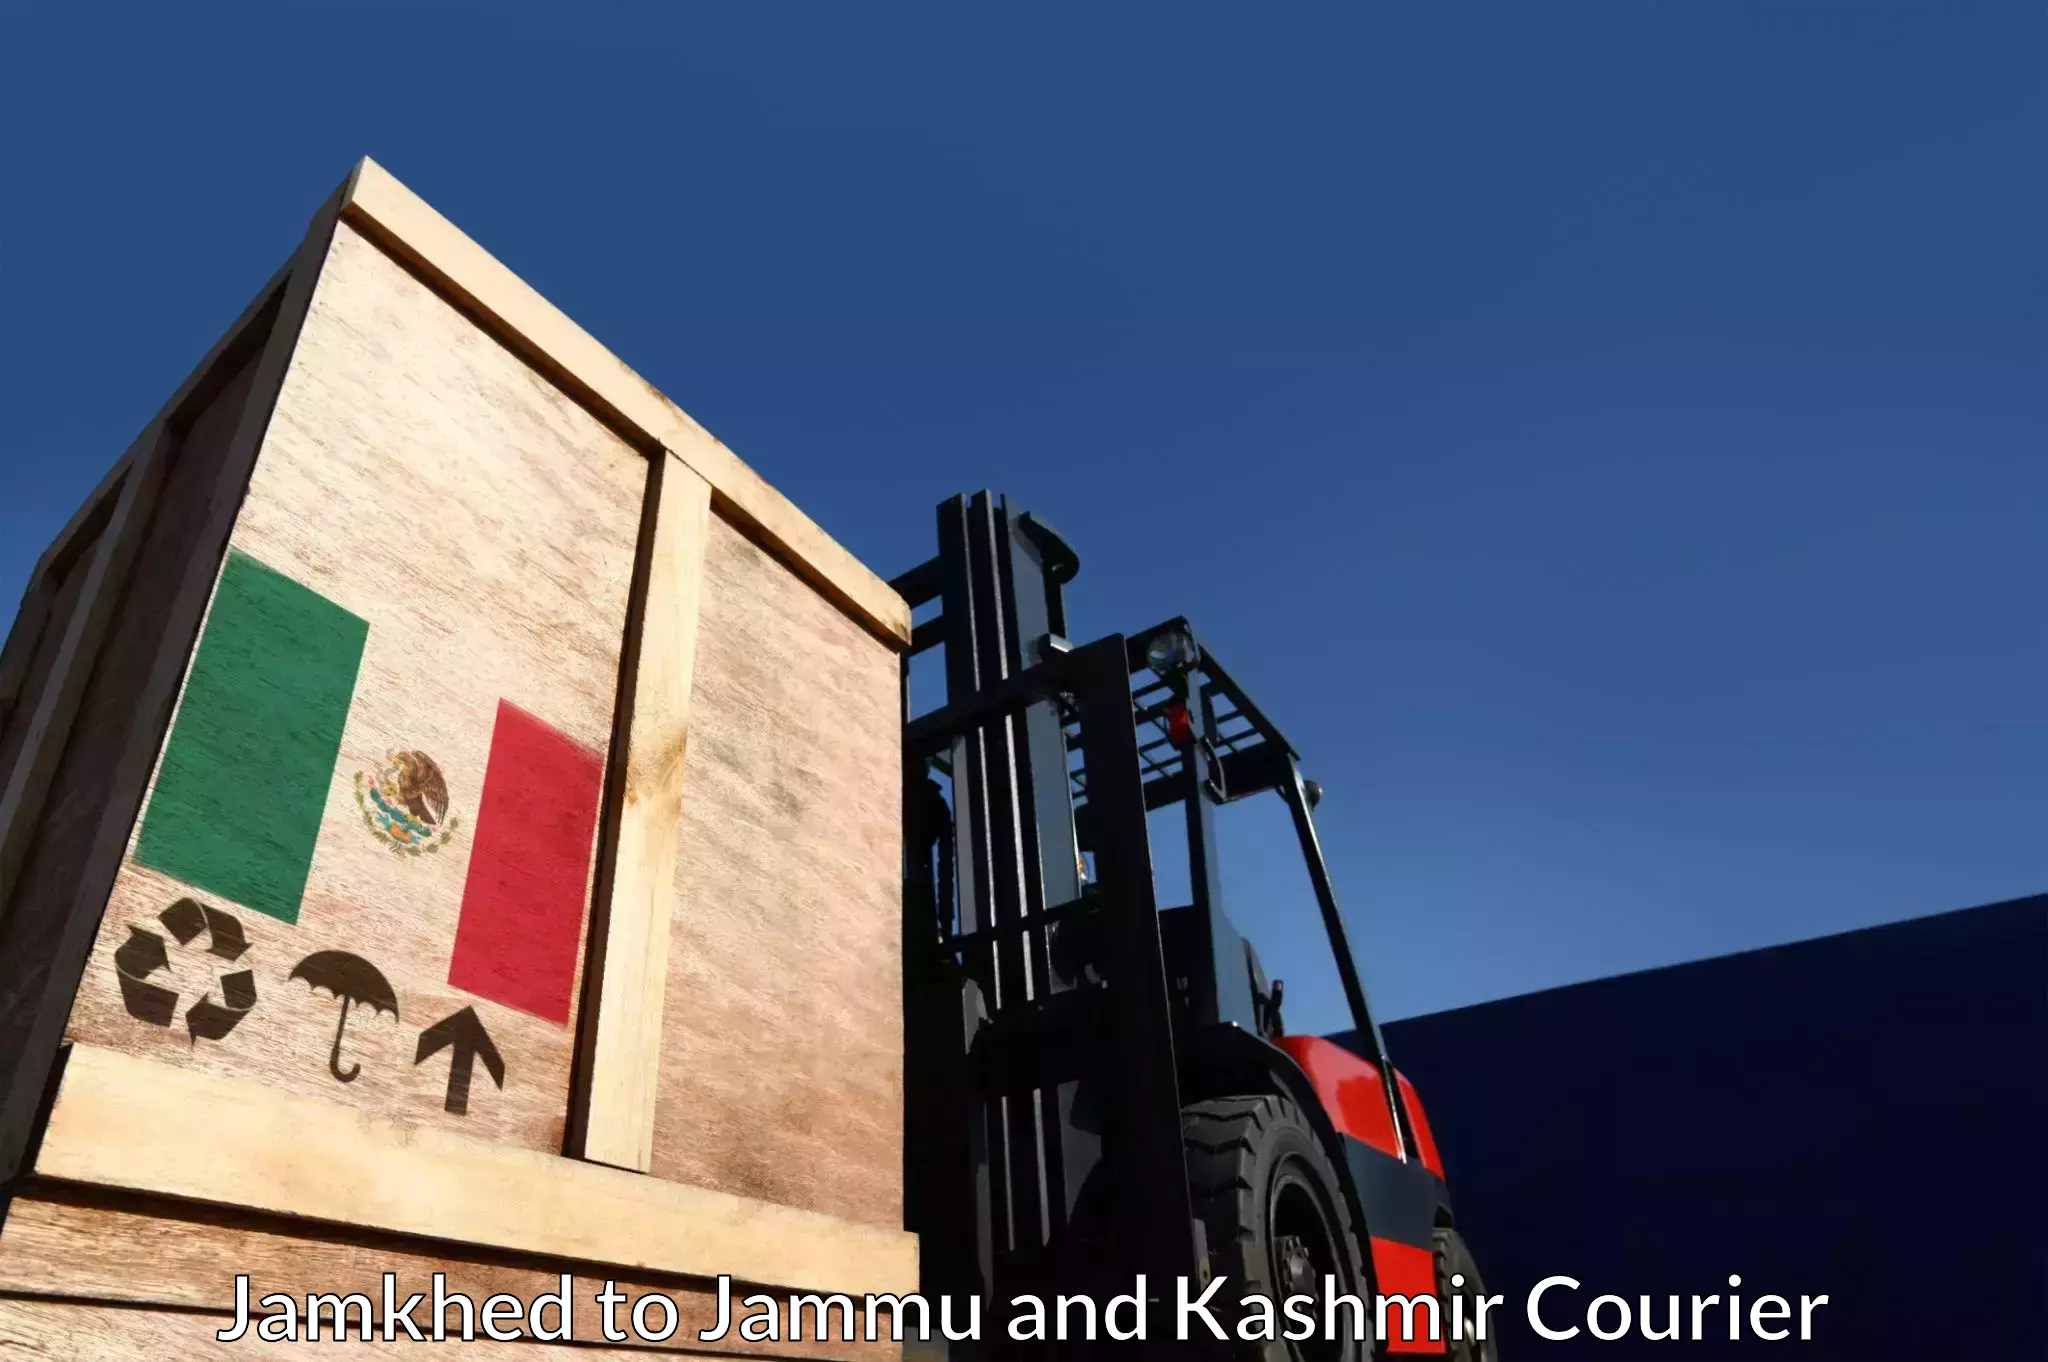 Streamlined shipping process Jamkhed to Jammu and Kashmir